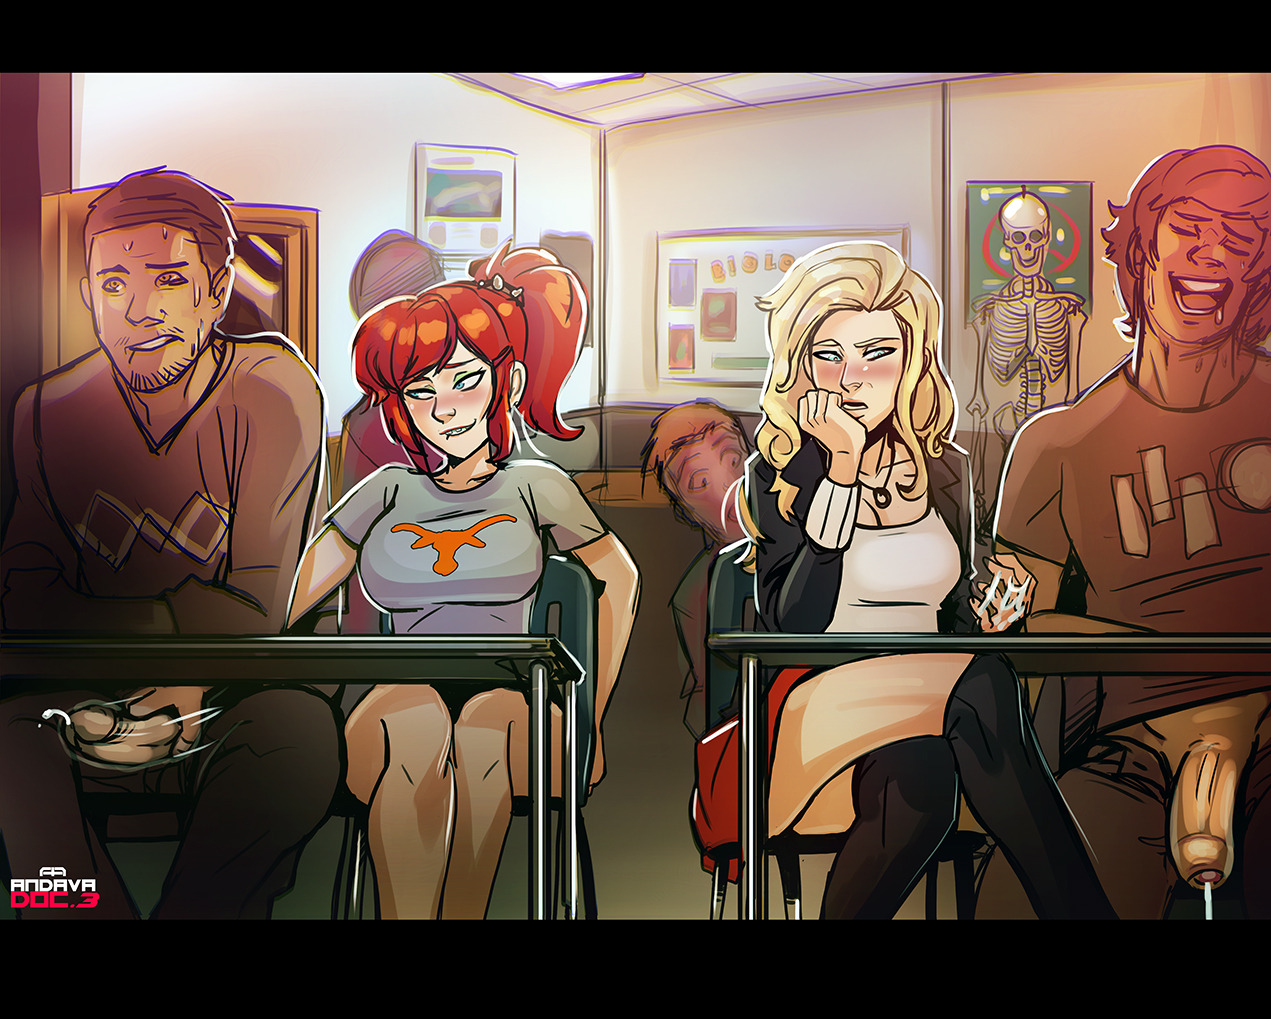 andava:    Teen!Marty and Brianna handjobs under the table  Commissioned by @redraider91!The